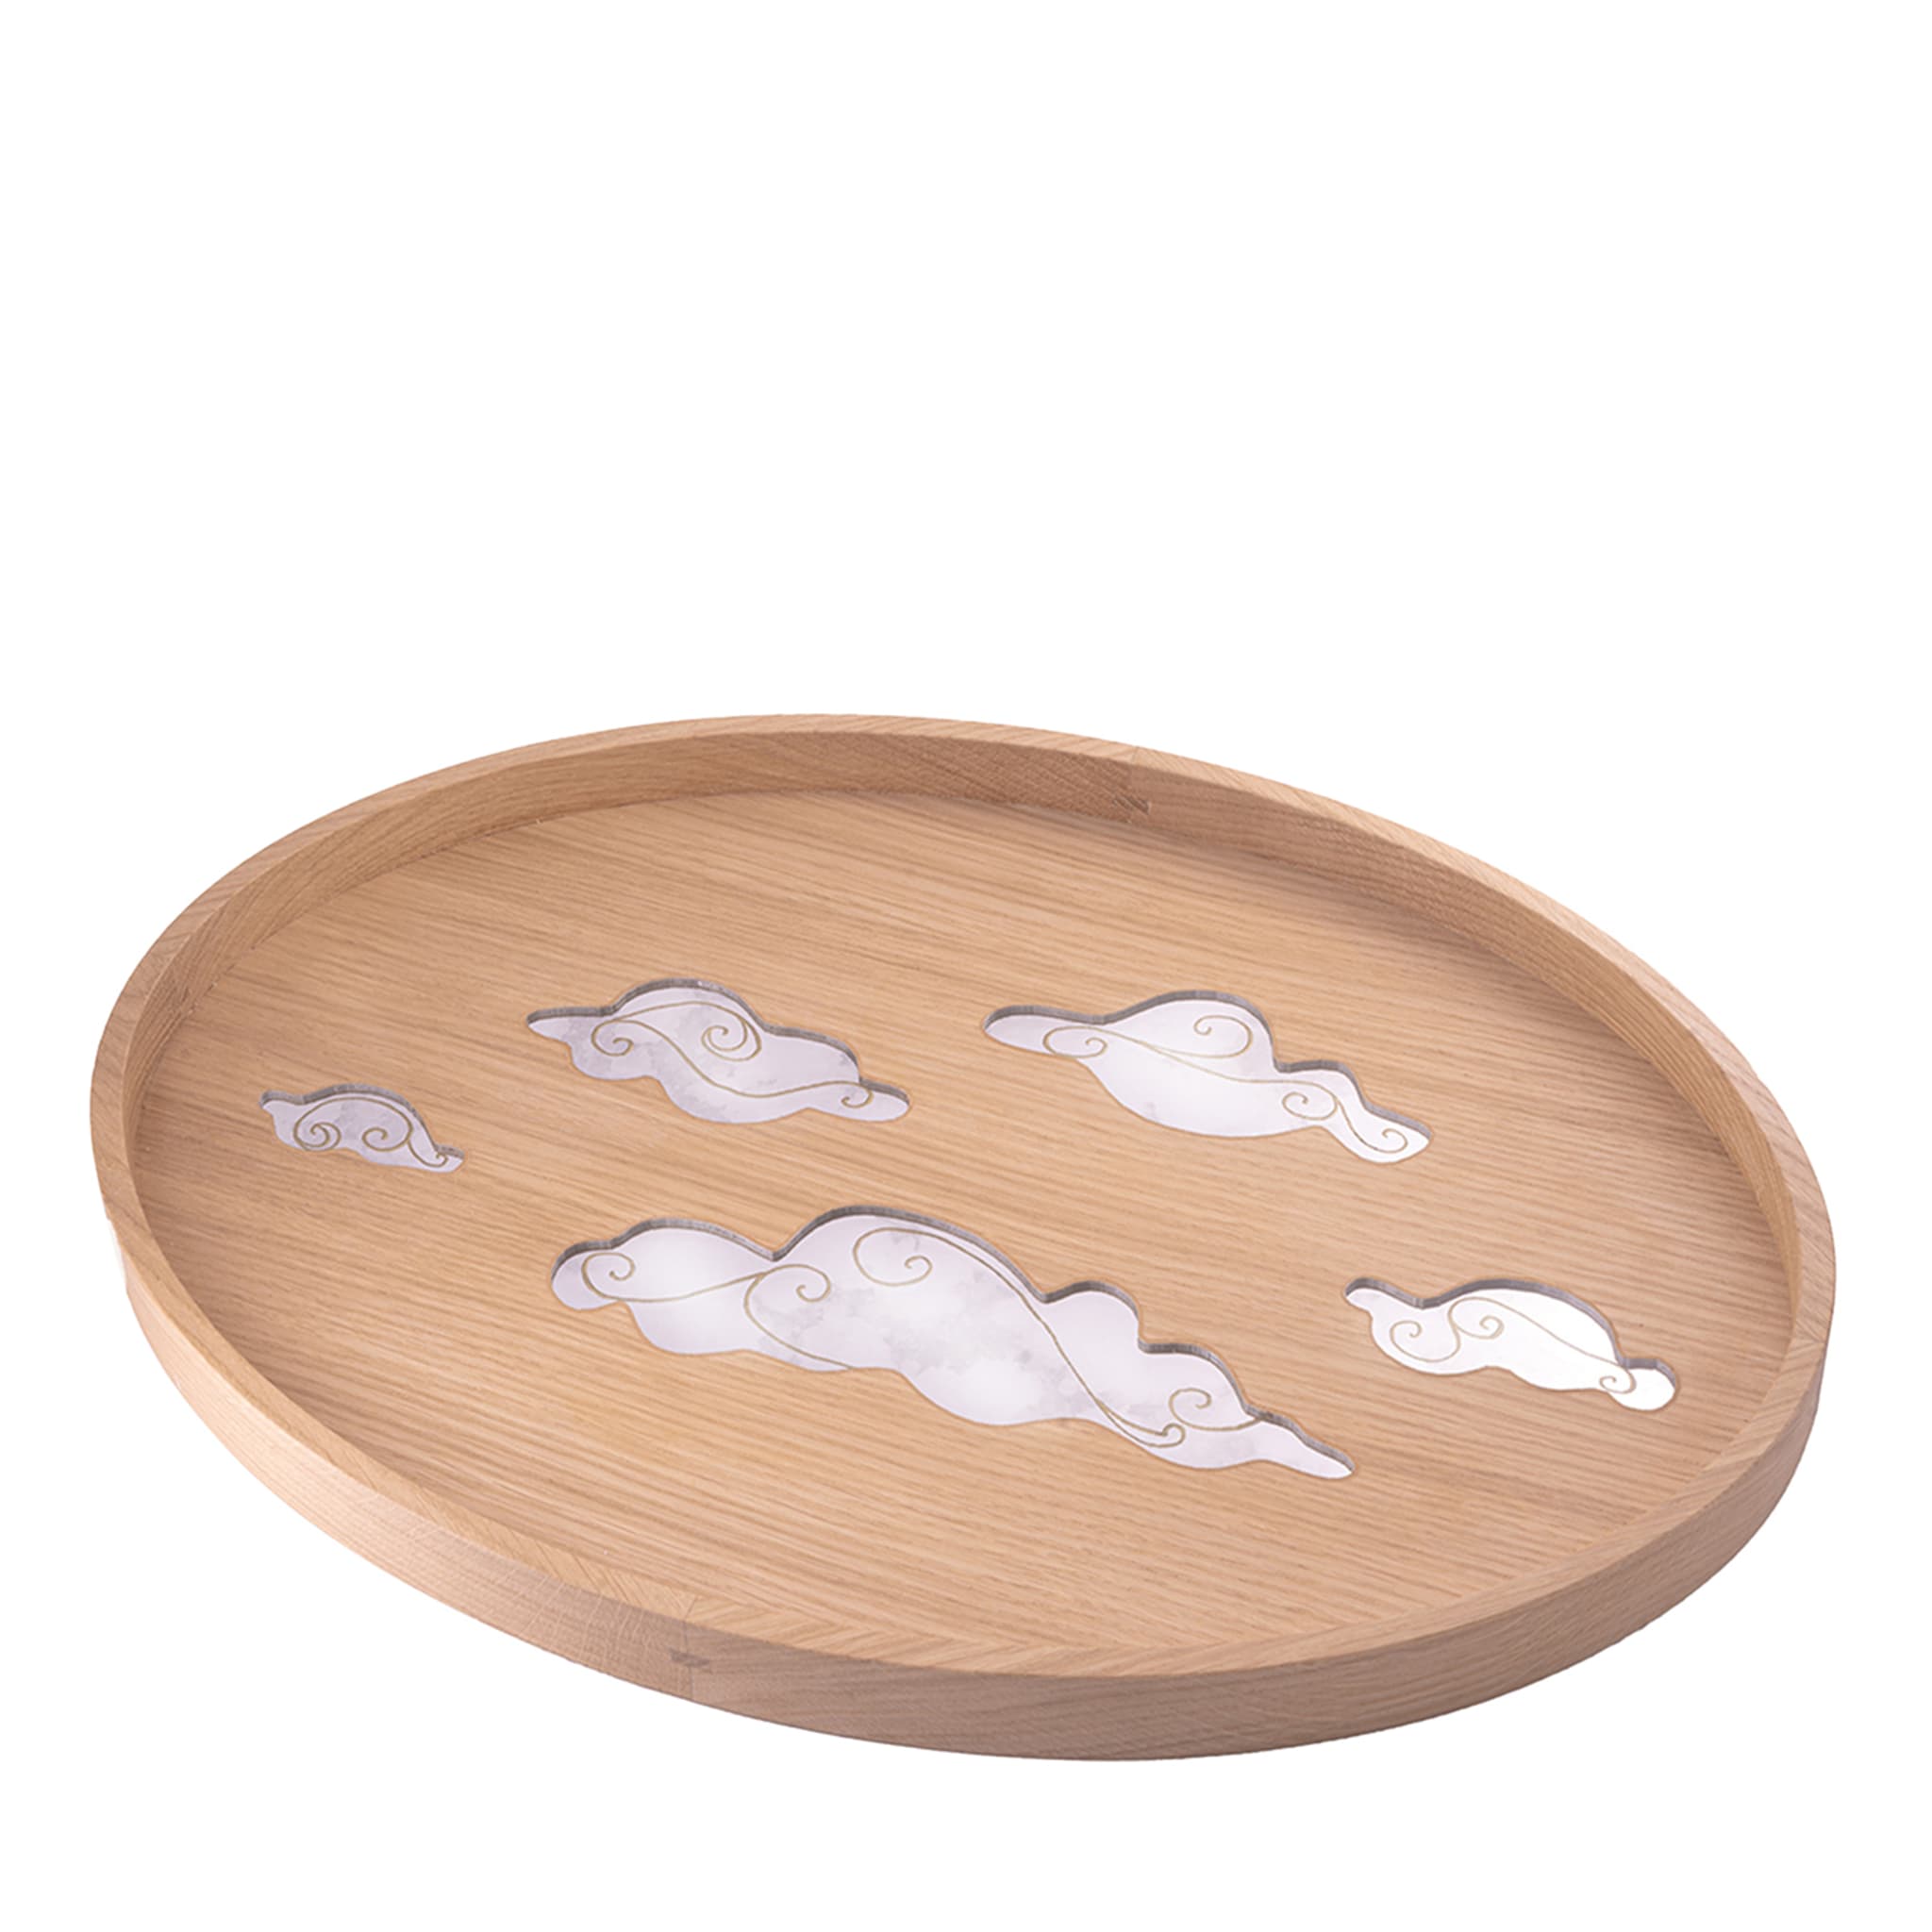 Casarialto Atelier Clouds Mirror Tray by Giovanni Simionato - Main view